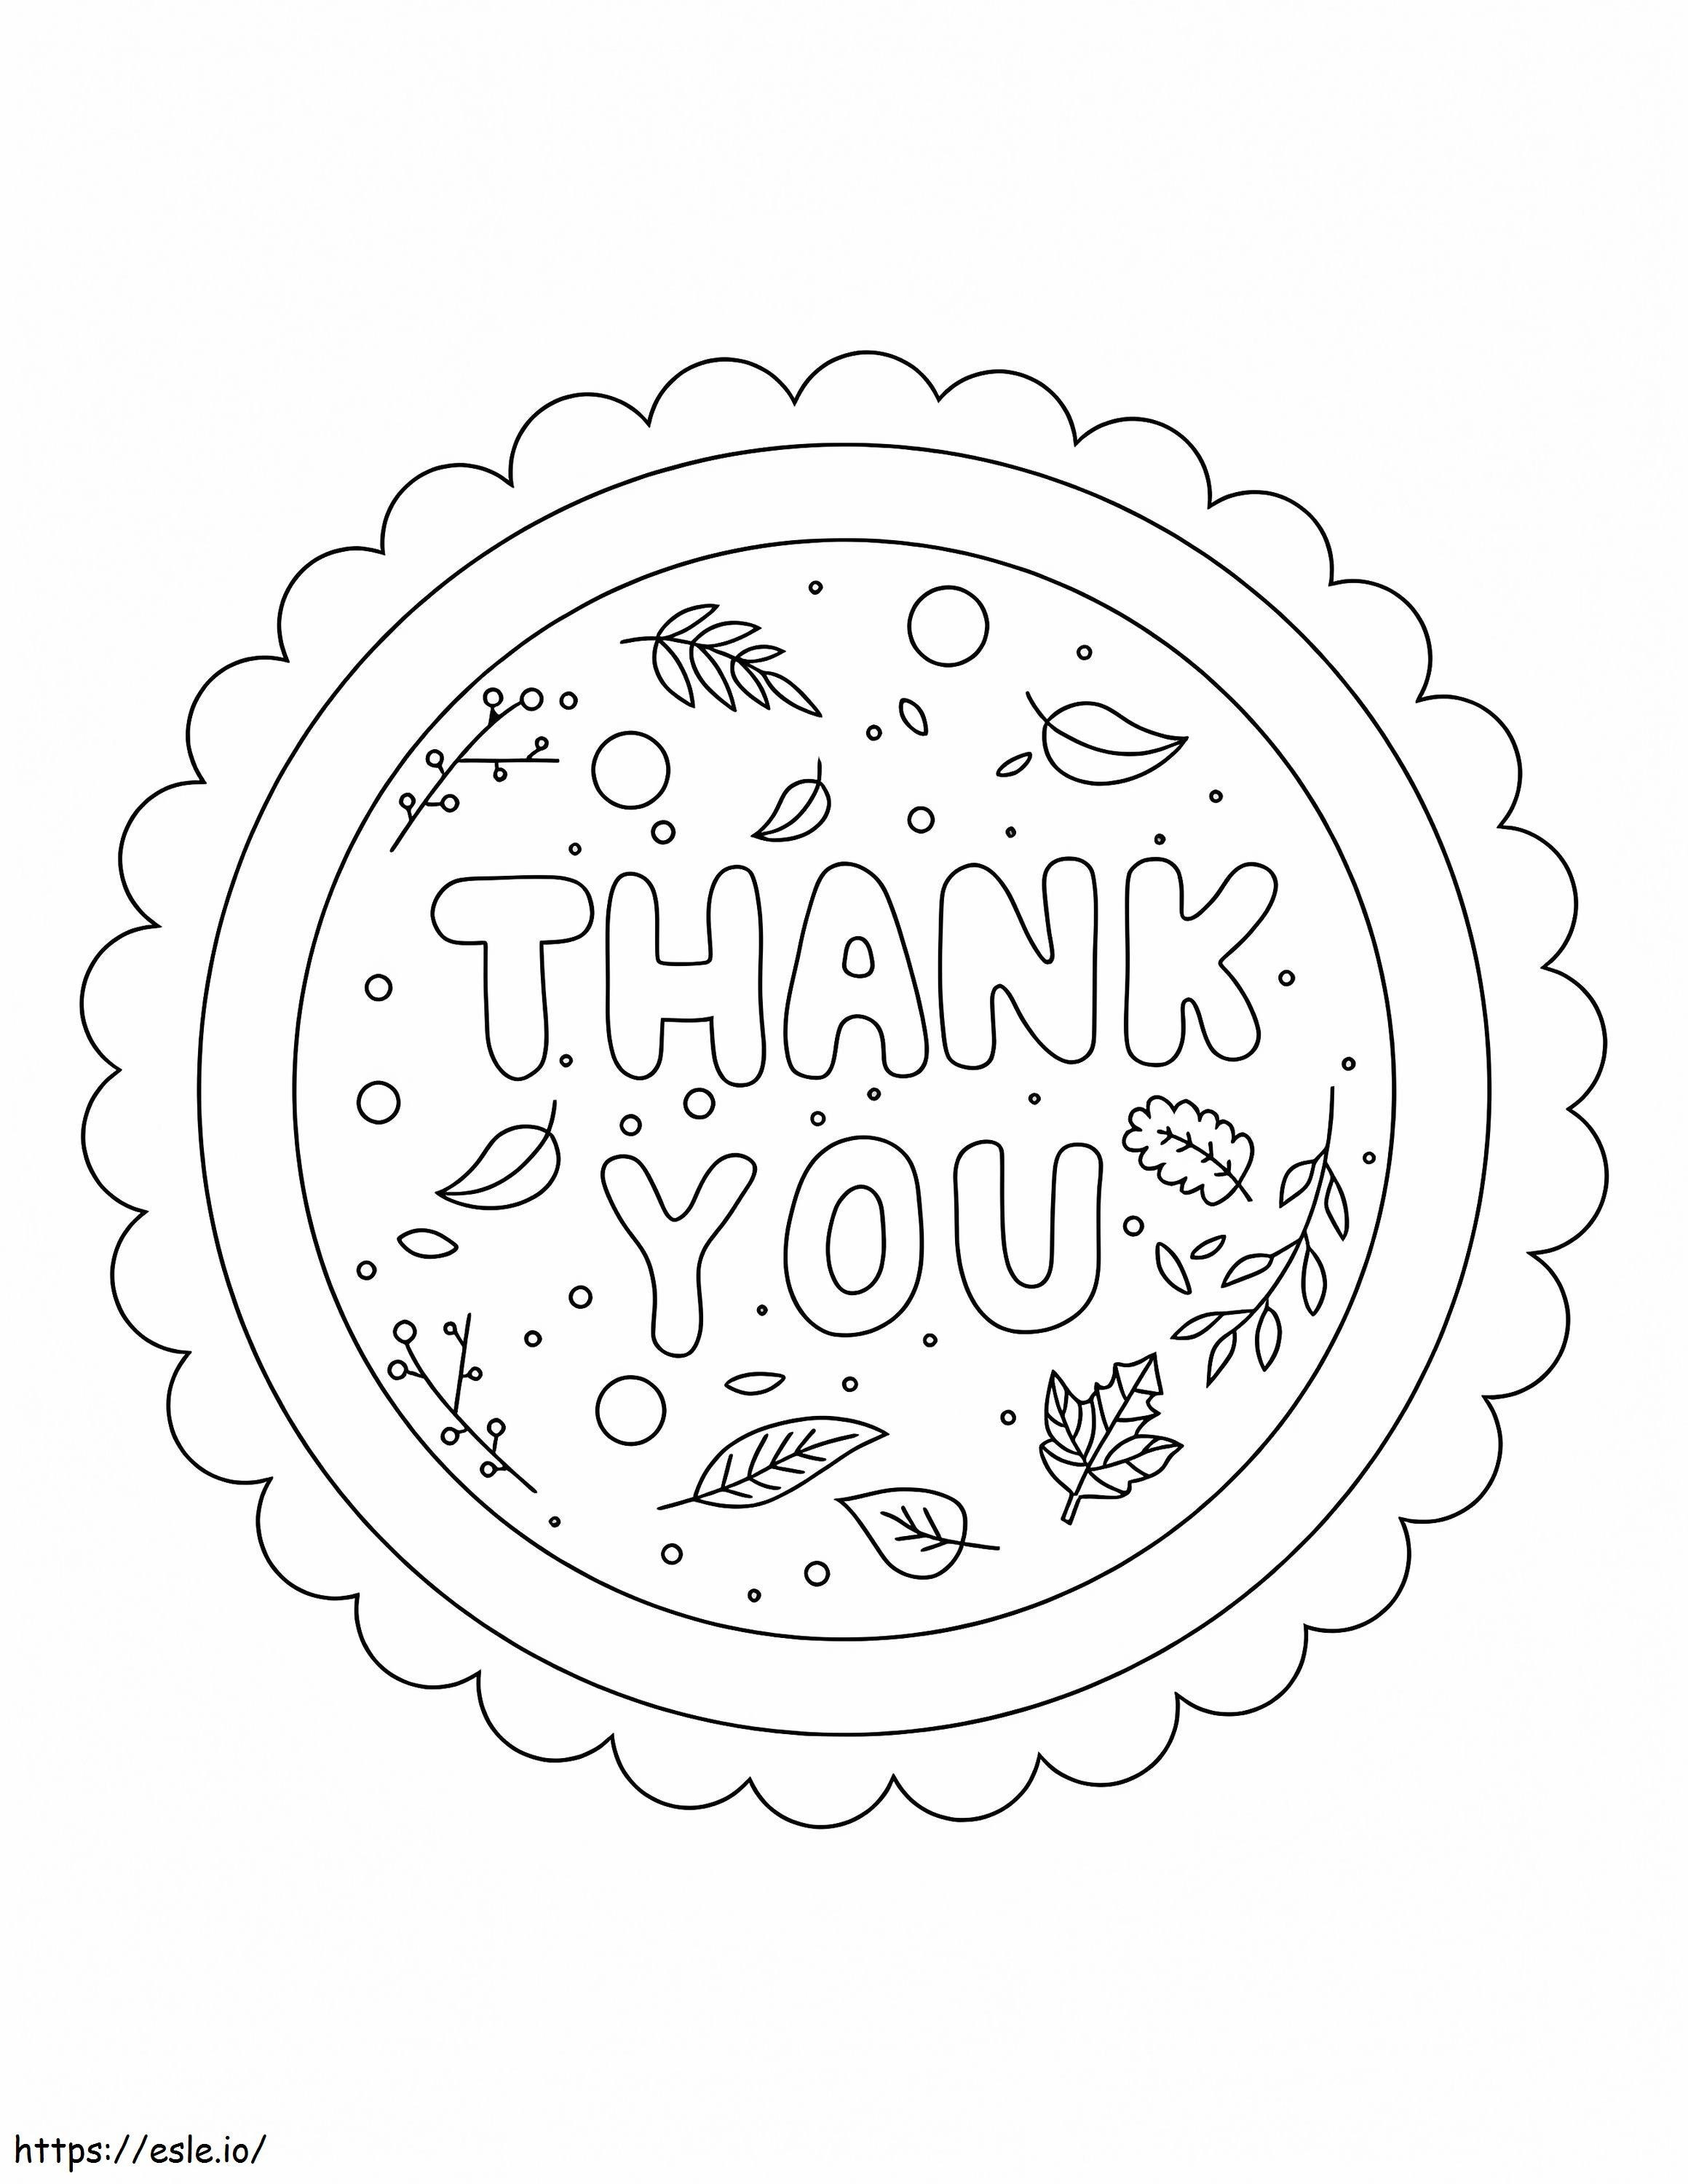 Awesome Thank You coloring page